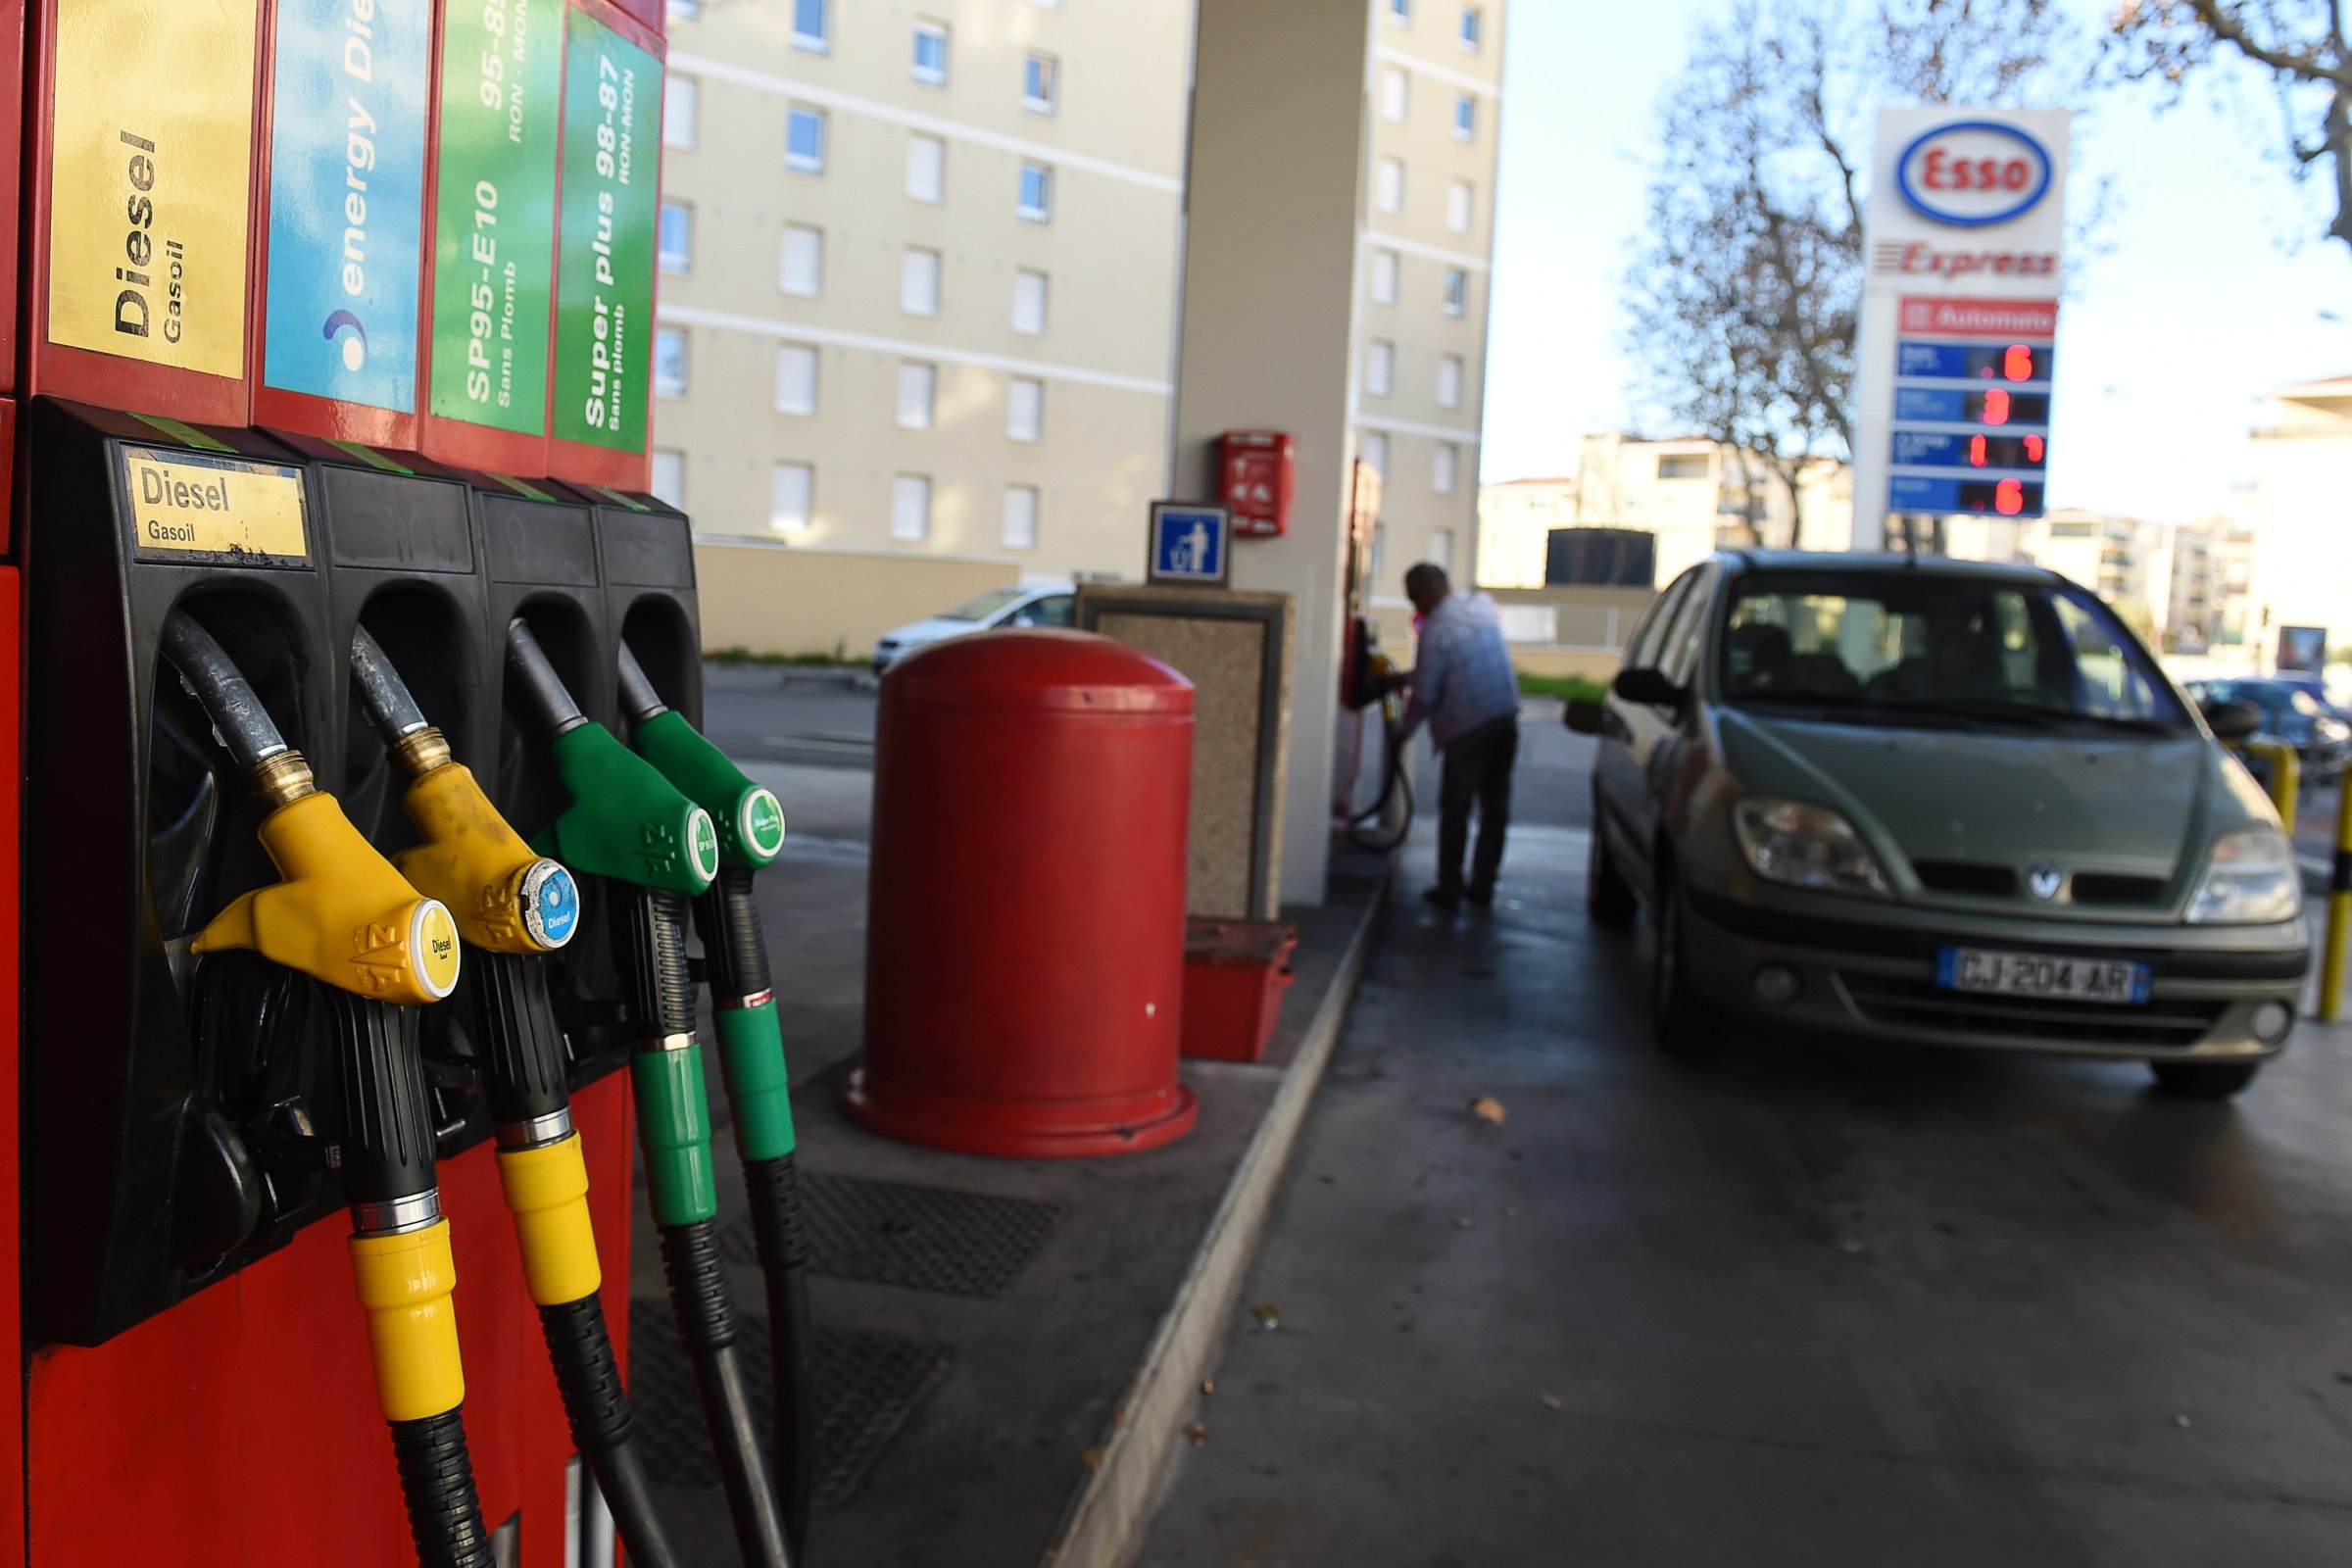 A consumer fills up his fuel tank at a gas station on Dec. 26, 2014 in Marseille, France.